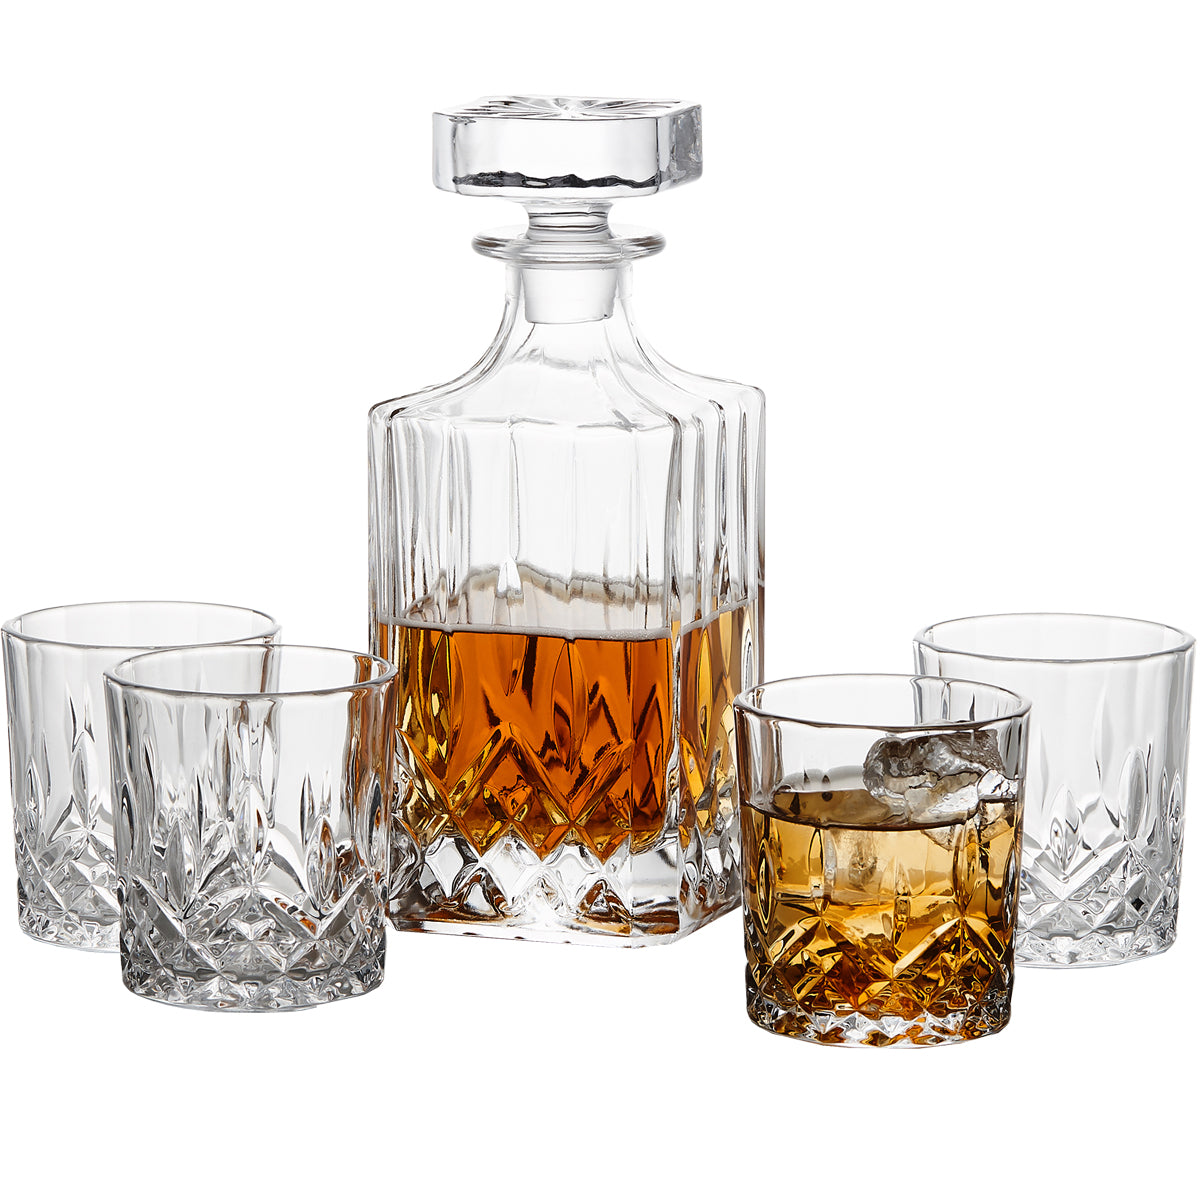 https://cdn.shopify.com/s/files/1/1256/5595/products/whiskeydecanter-main_1600x.jpg?v=1649046607